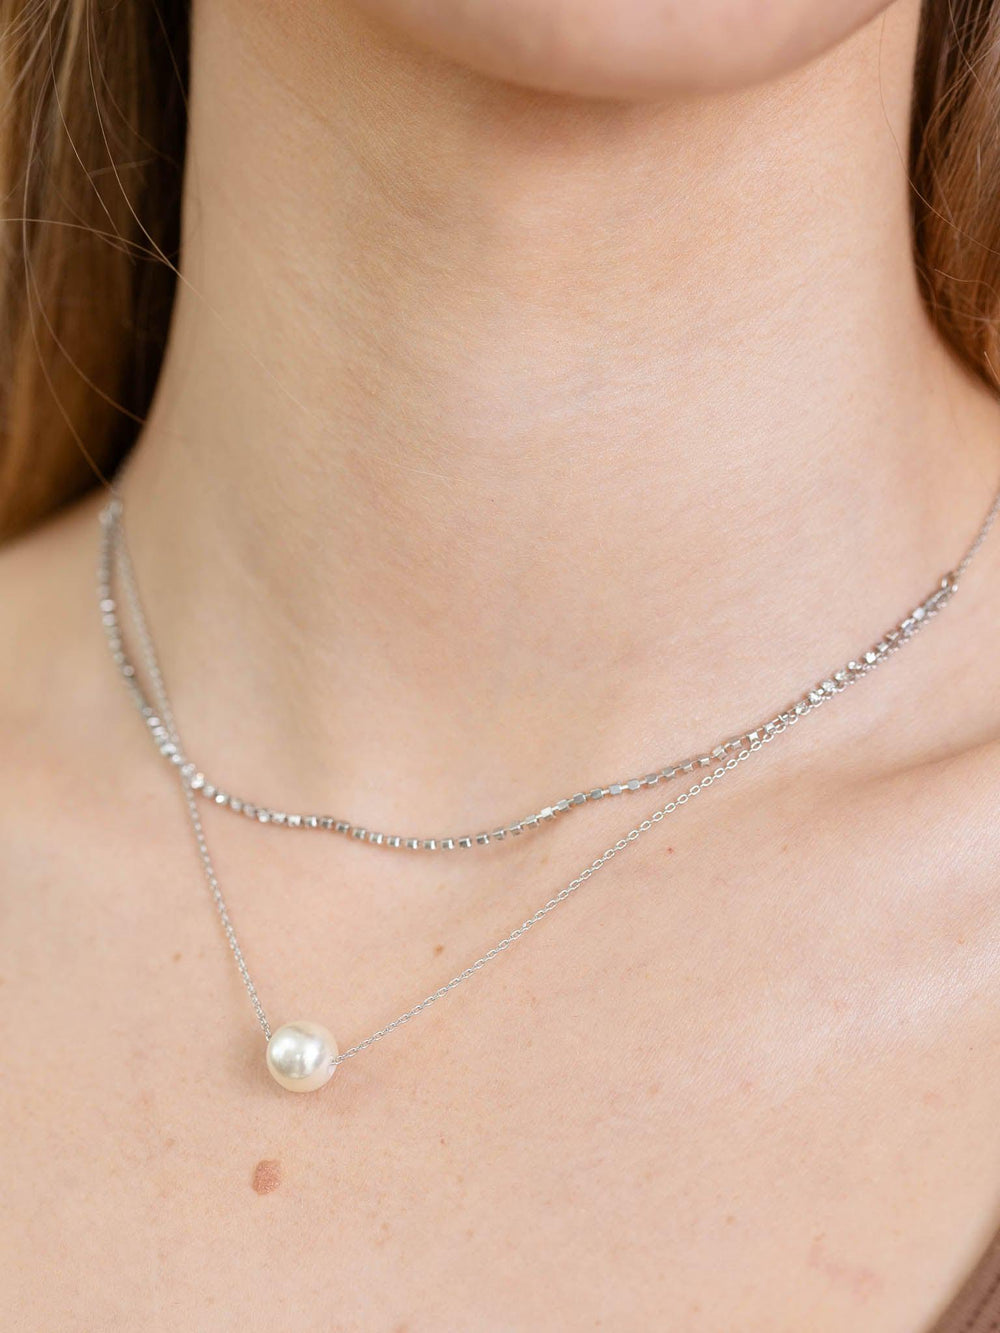 Ellison+Young-Layered Pearl & Shine Necklace - Leela and Lavender